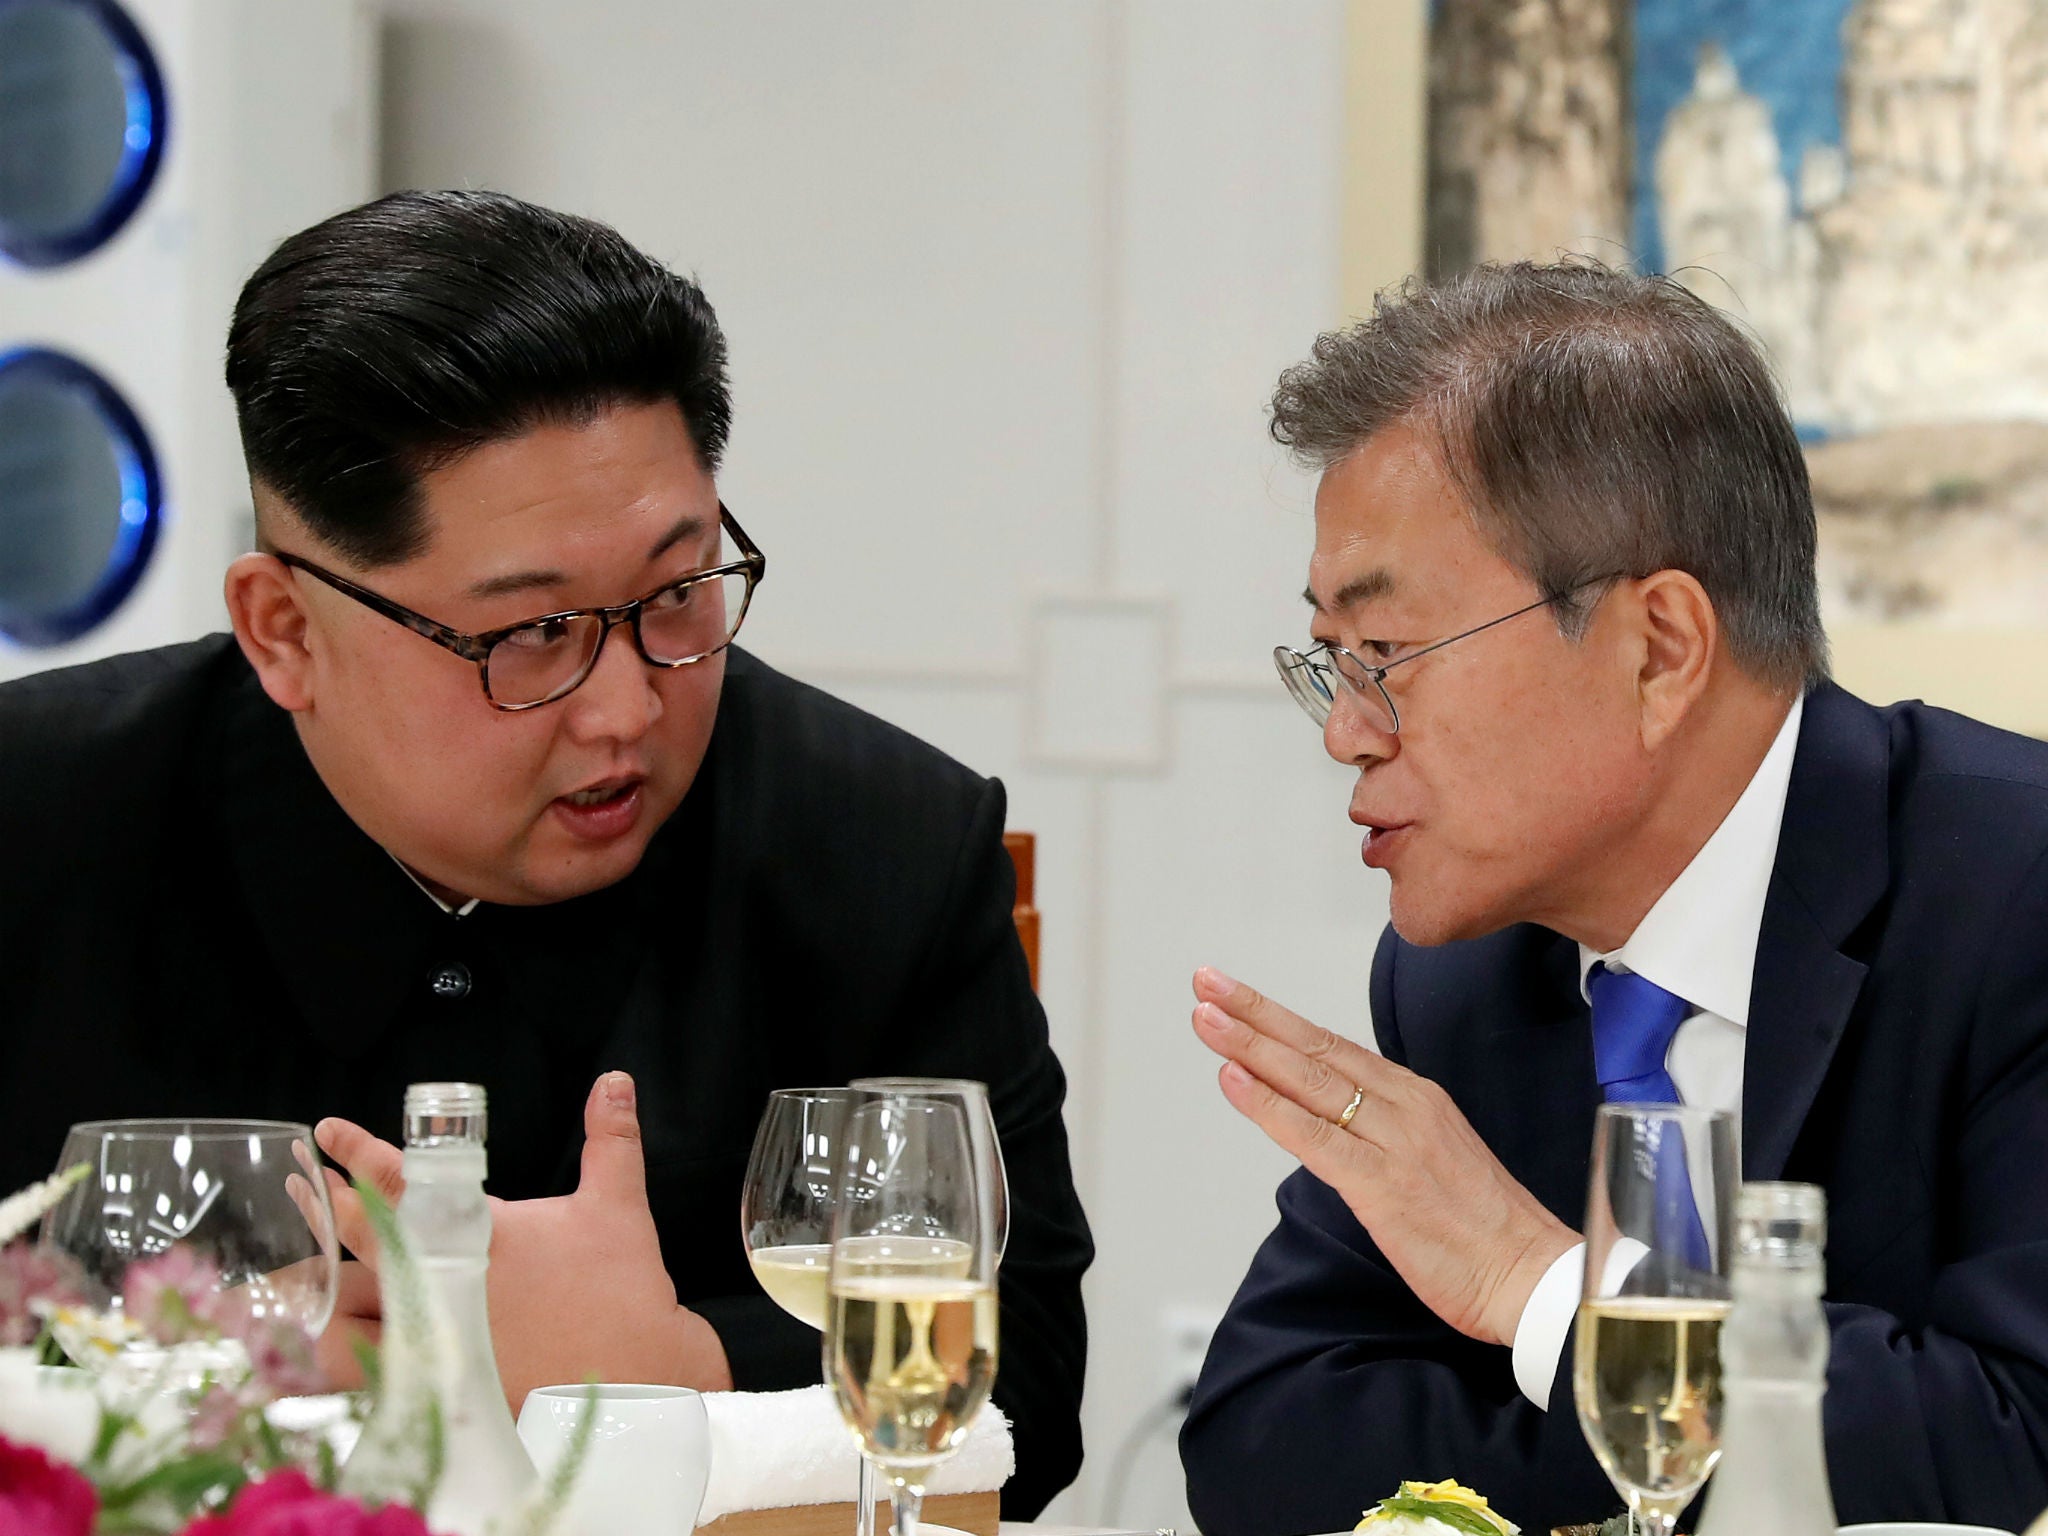 North Korean leader Kim Jong-un and South Korean president Moon Jae-in attend a banquet during an earlier meeting at the truce village of Panmunjom